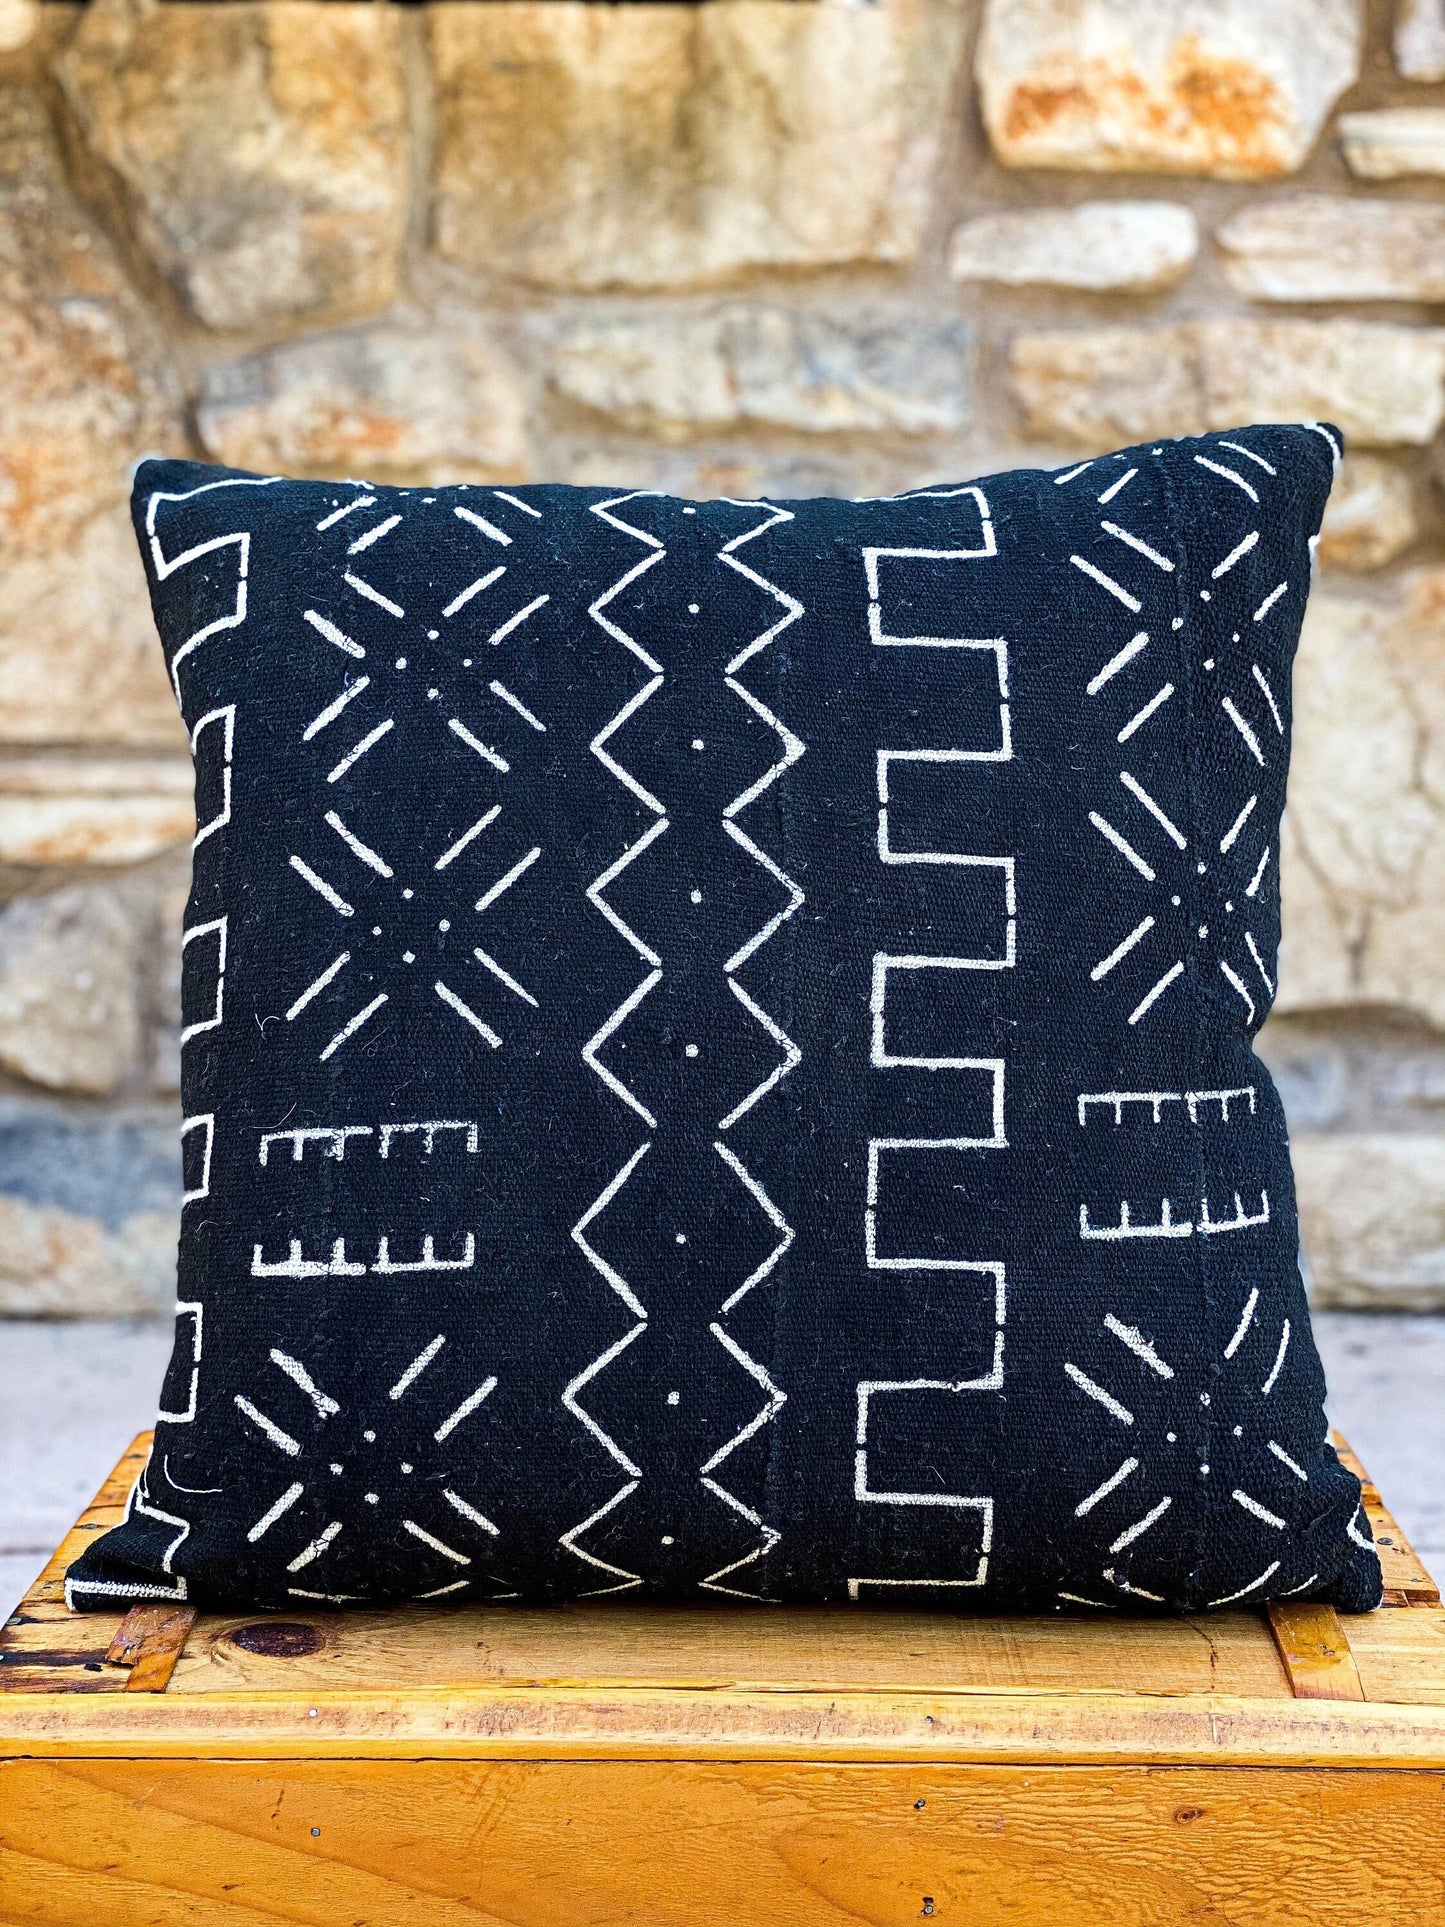 Mudcloth Pillow, Authentic Mud Cloth, Black Pillow Cover, 'Geo'